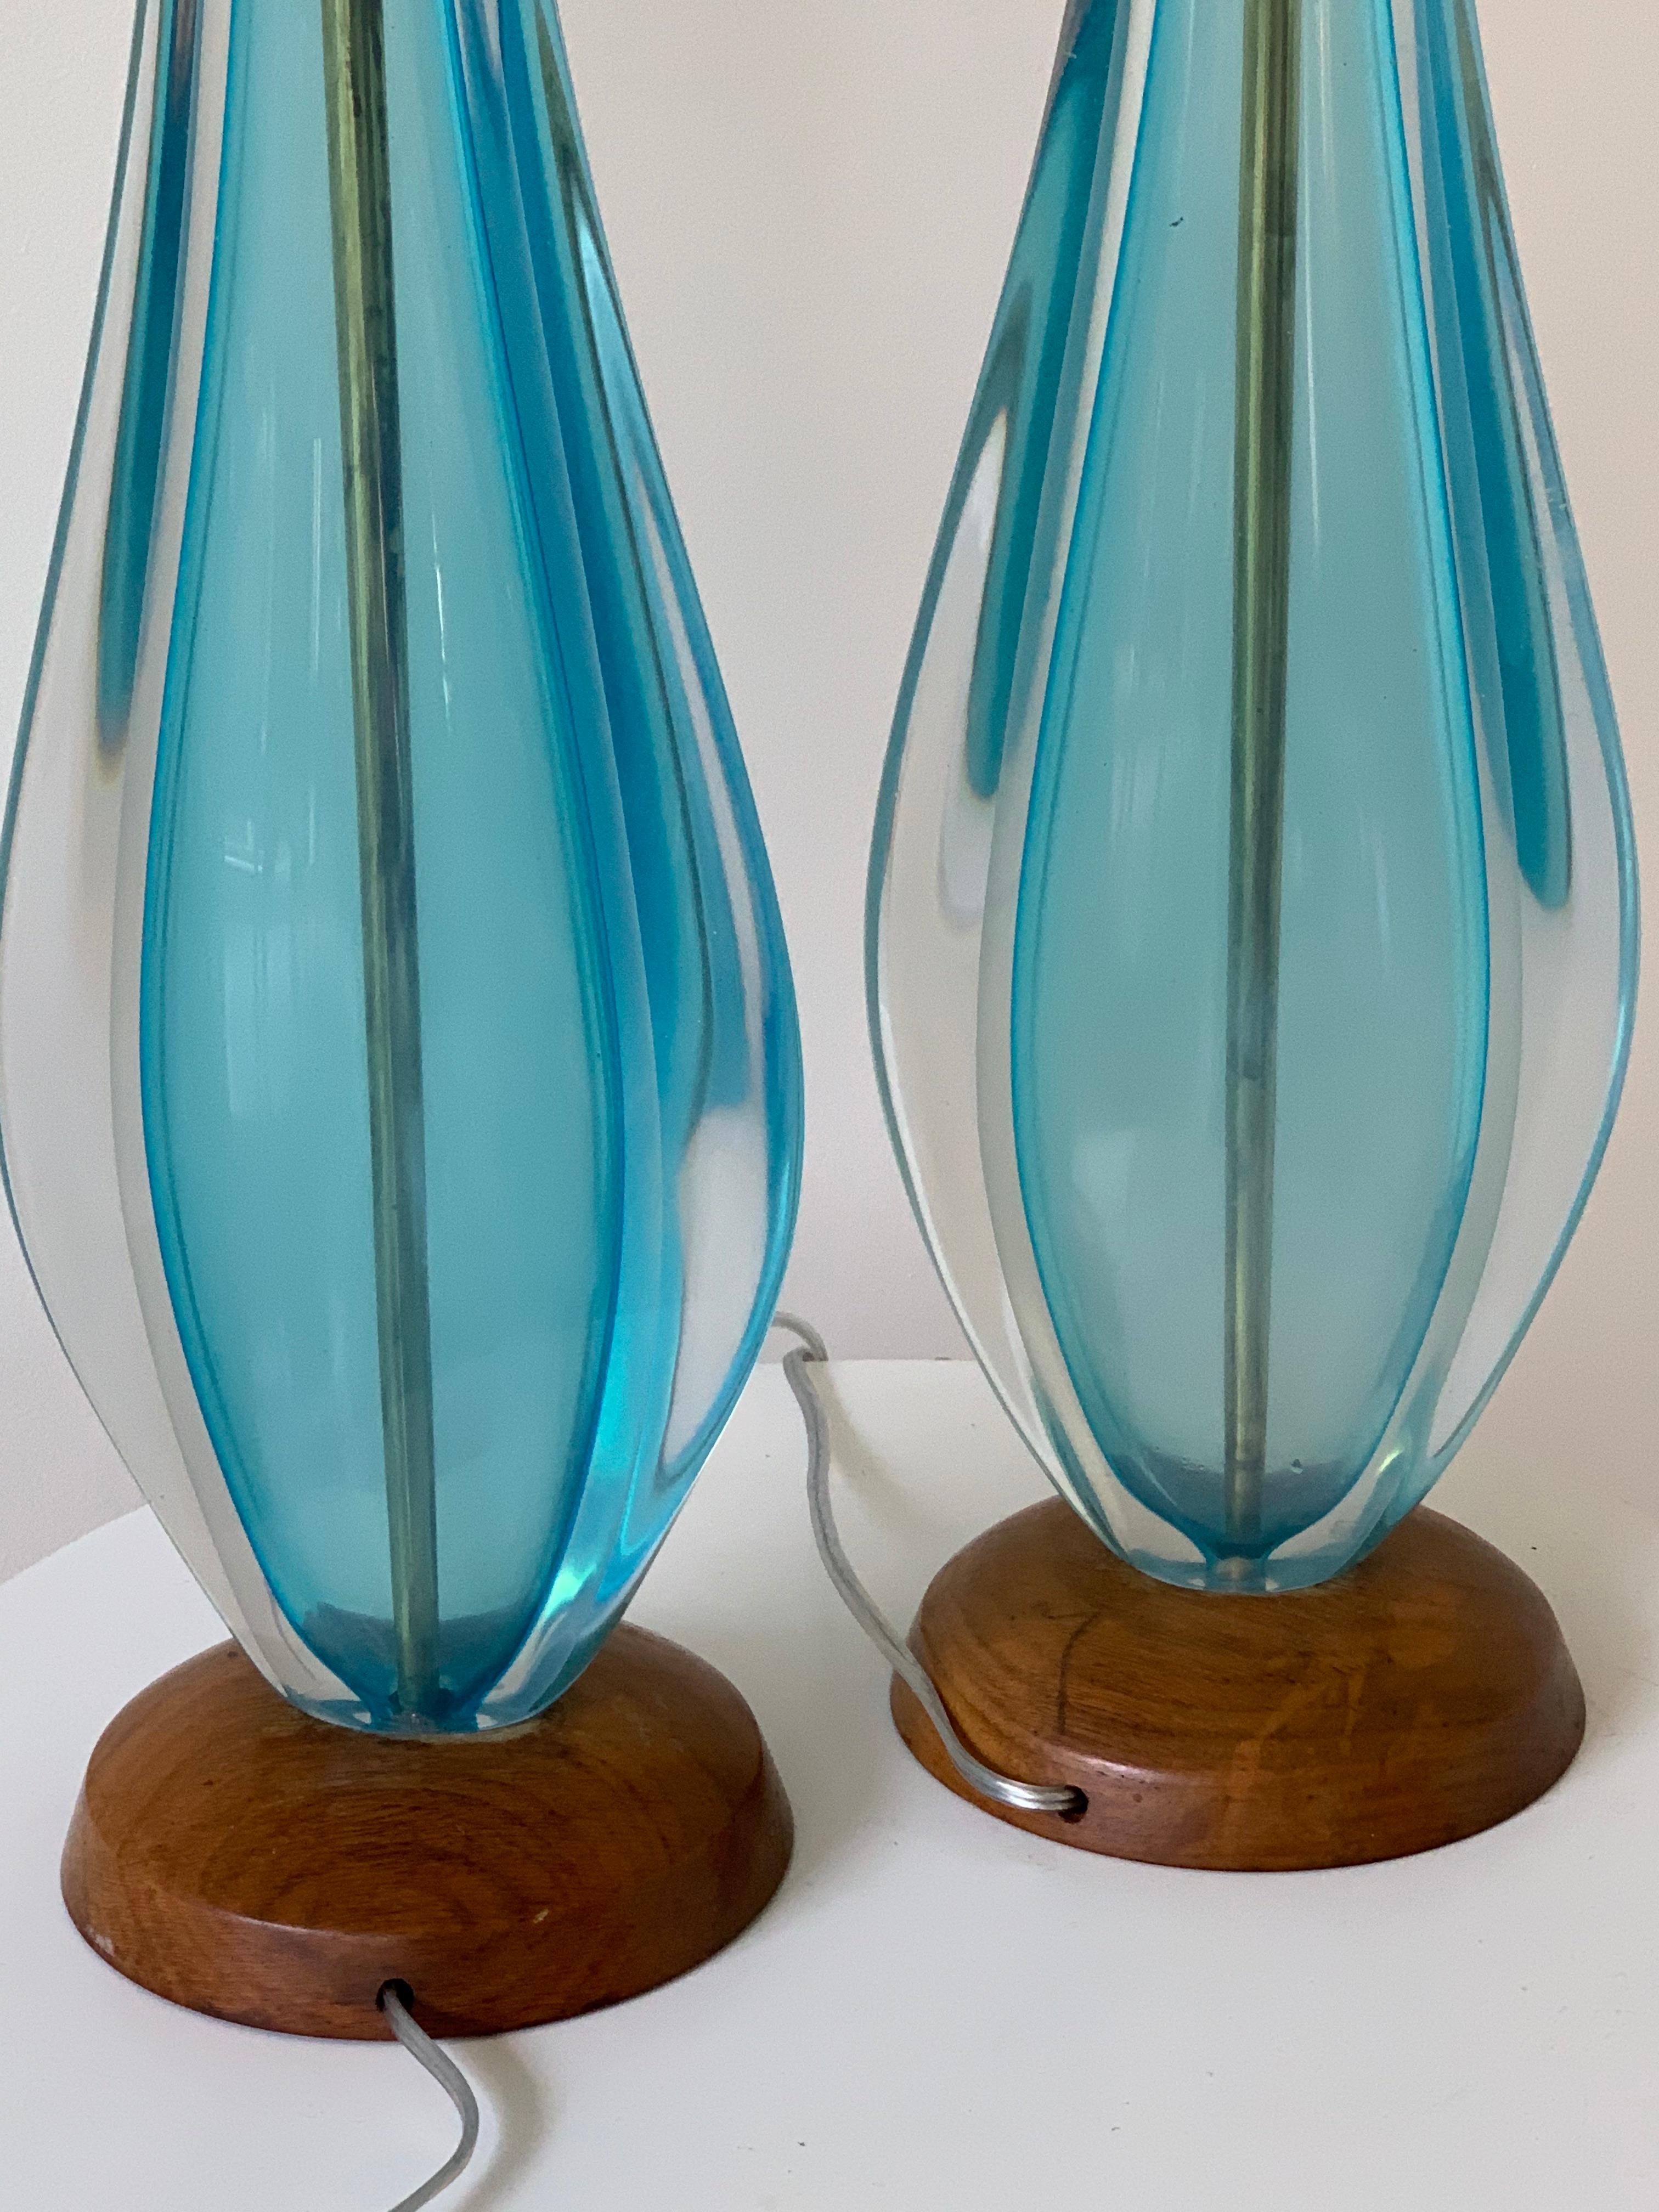 Ethereal blue Murano glass table lamps, set on walnut bases.